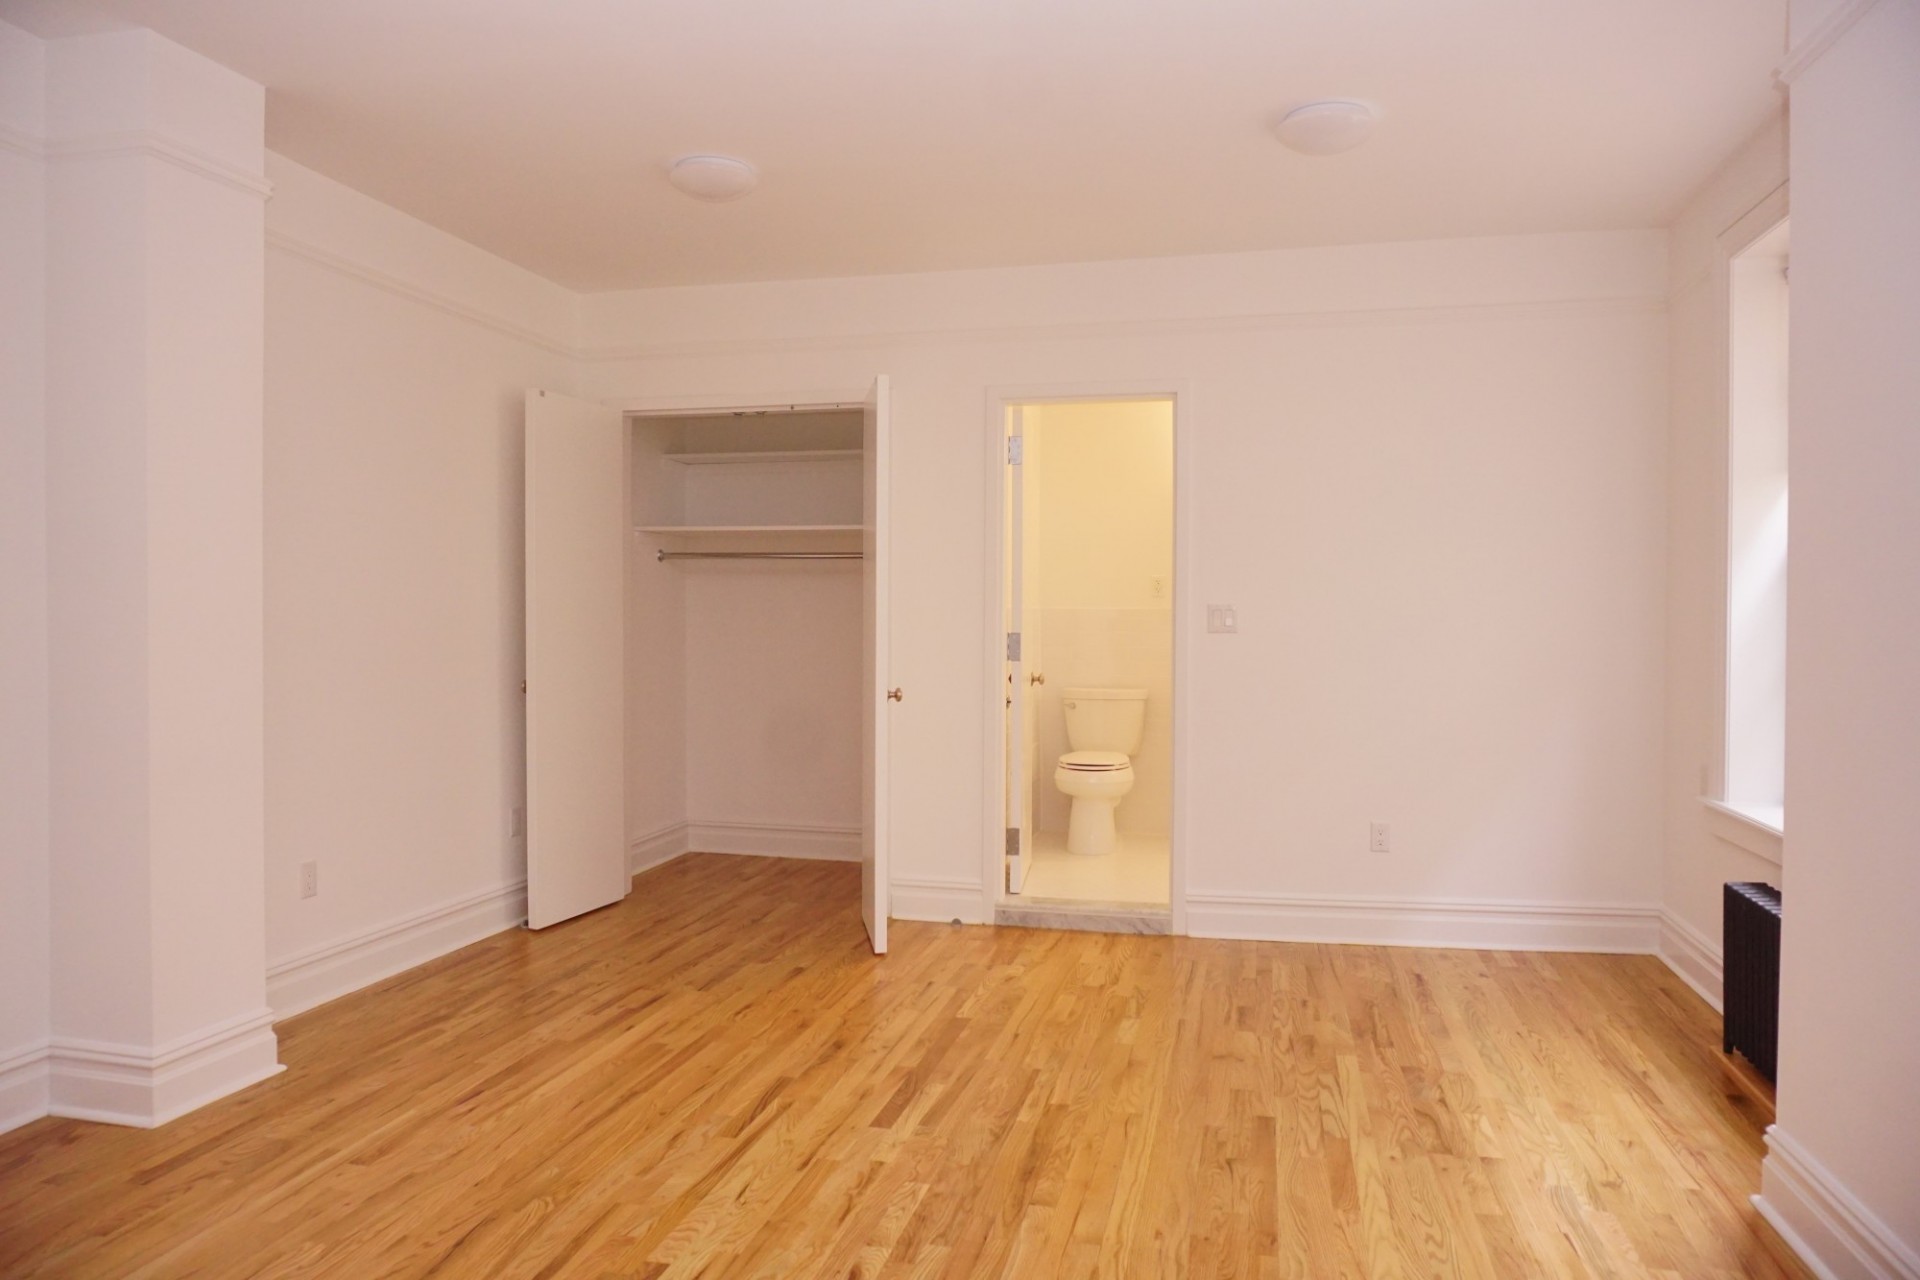 Example of studio apartment - living area and bathroom view